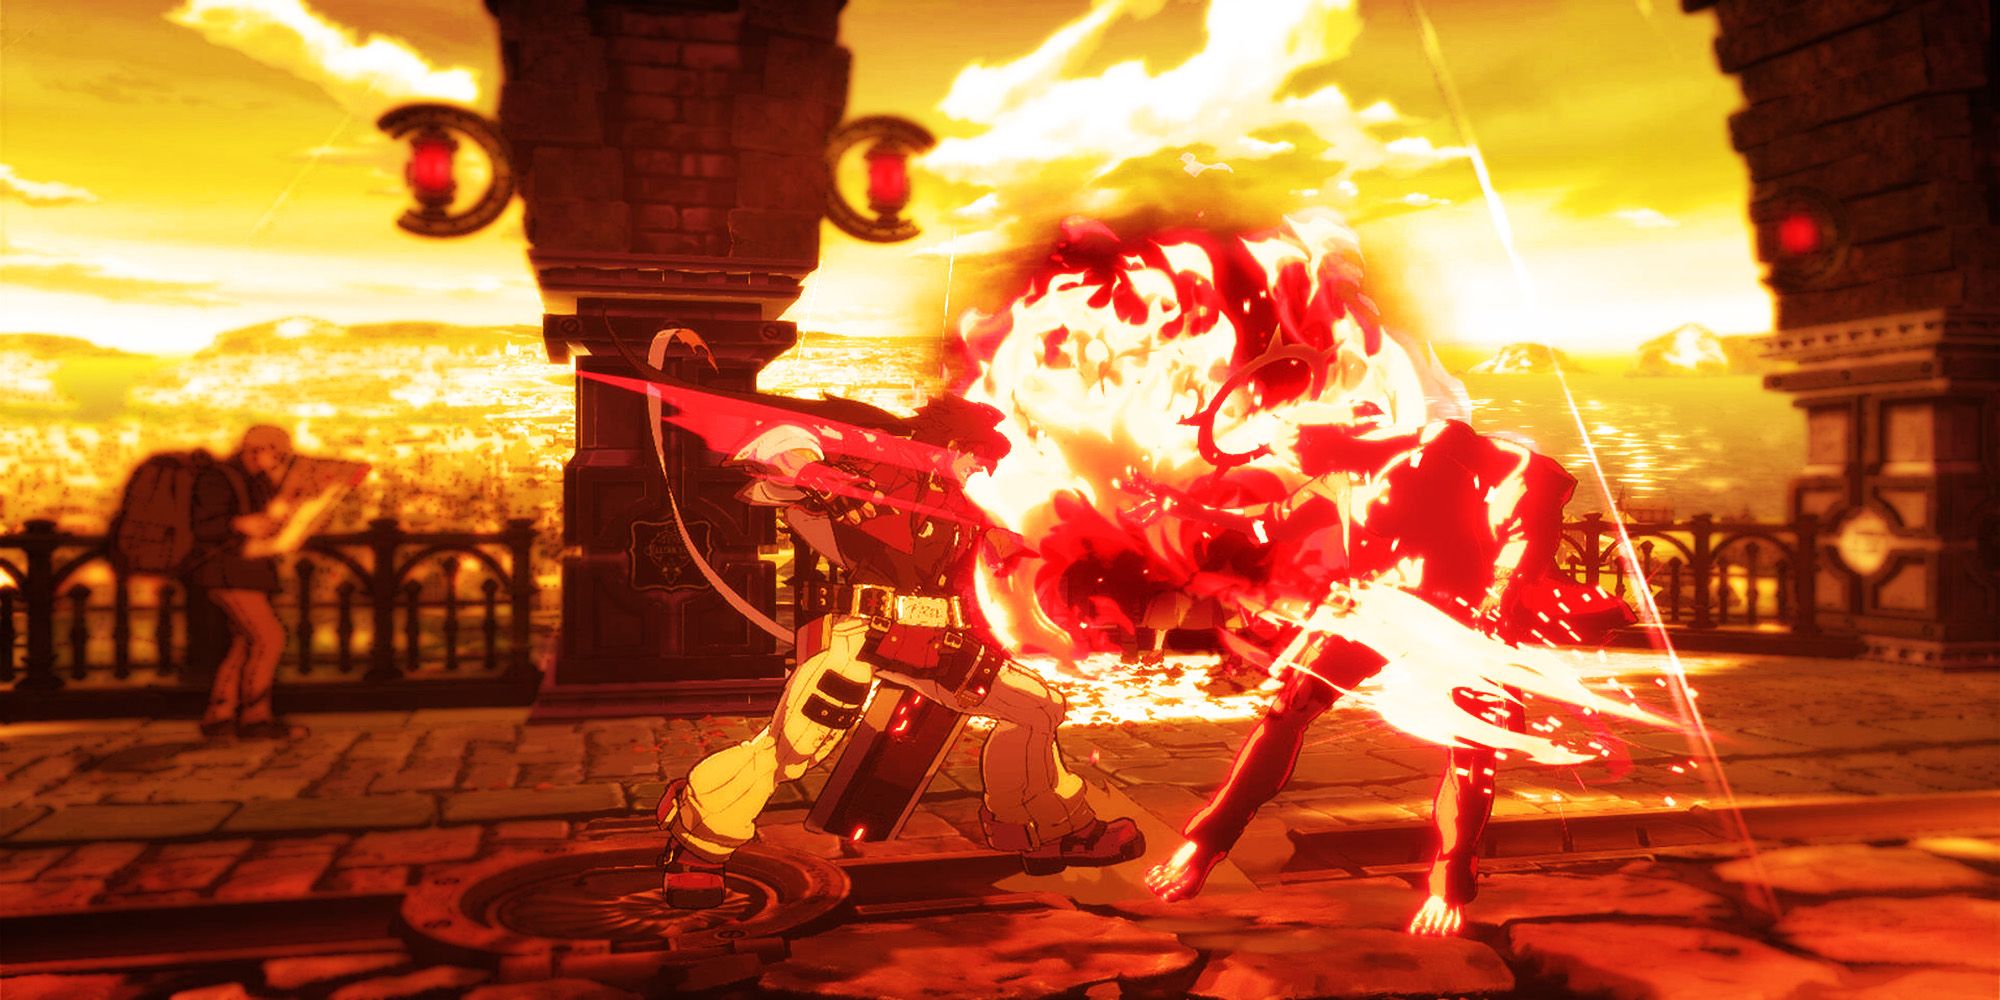 Custom Chaos vs Sol image from Guilty Gear Strive. Needs Watermark.